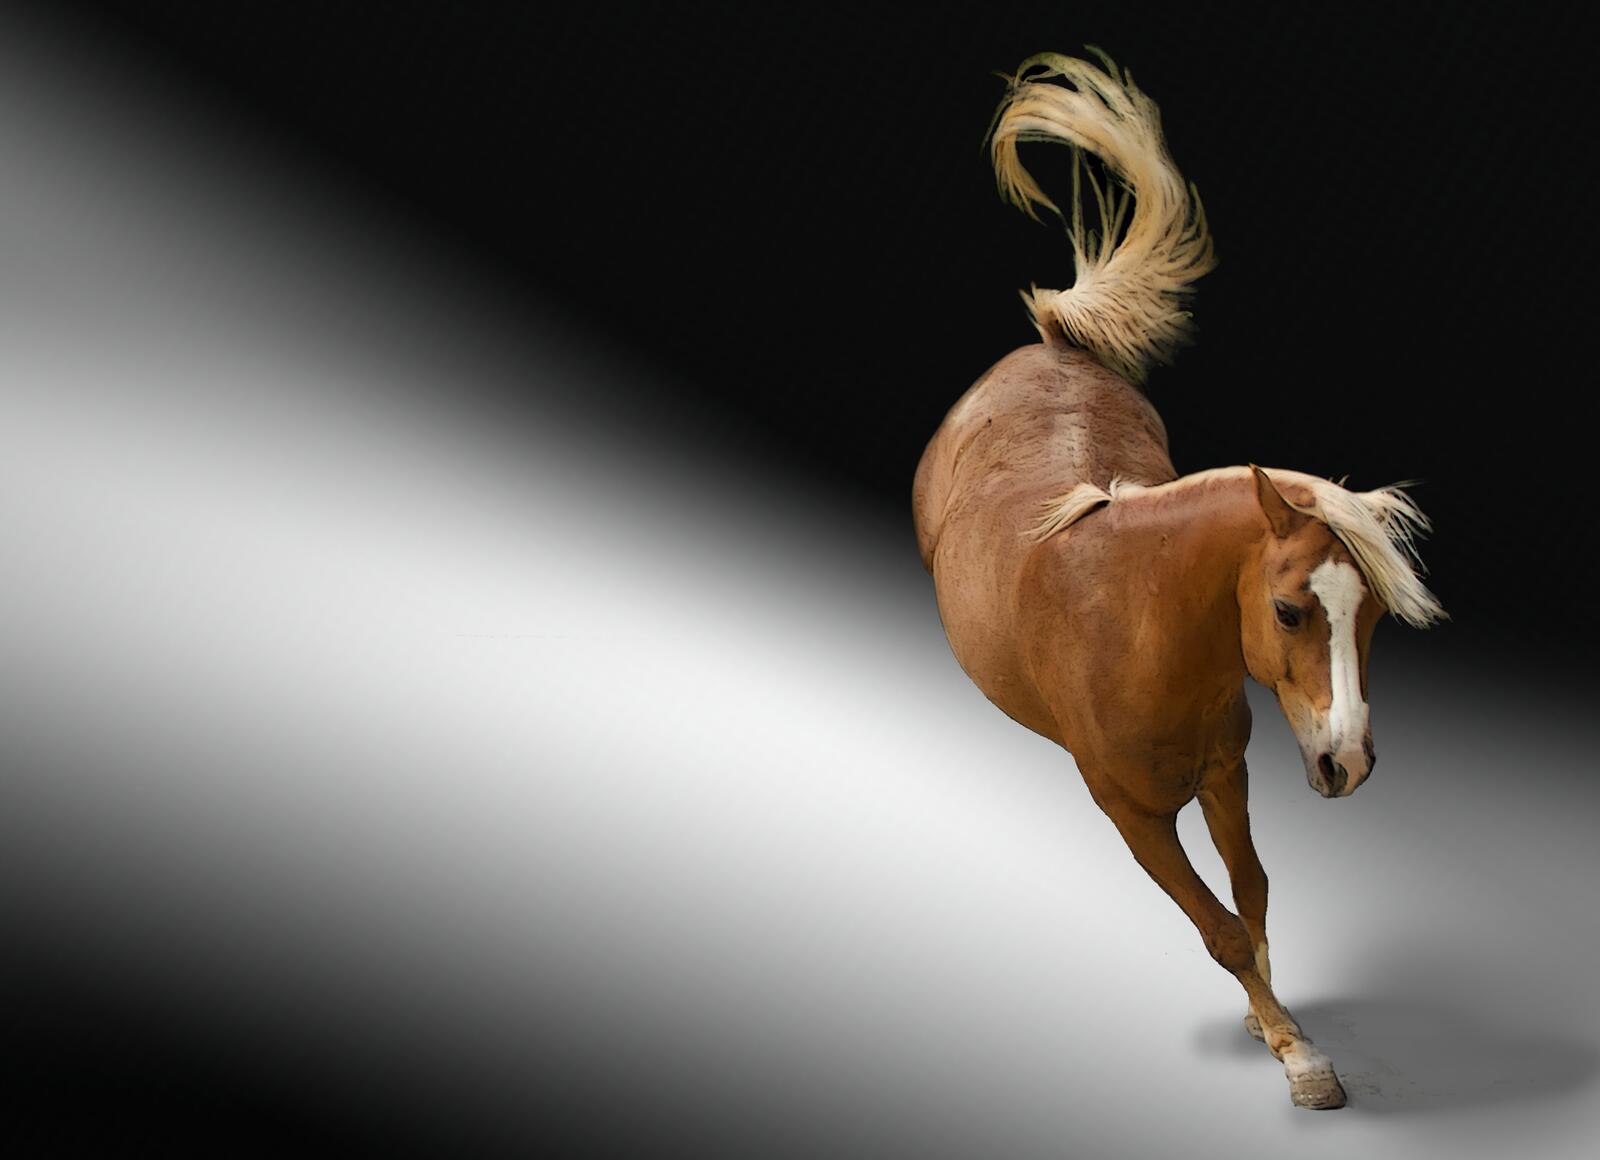 Wallpapers nature animal horse on the desktop